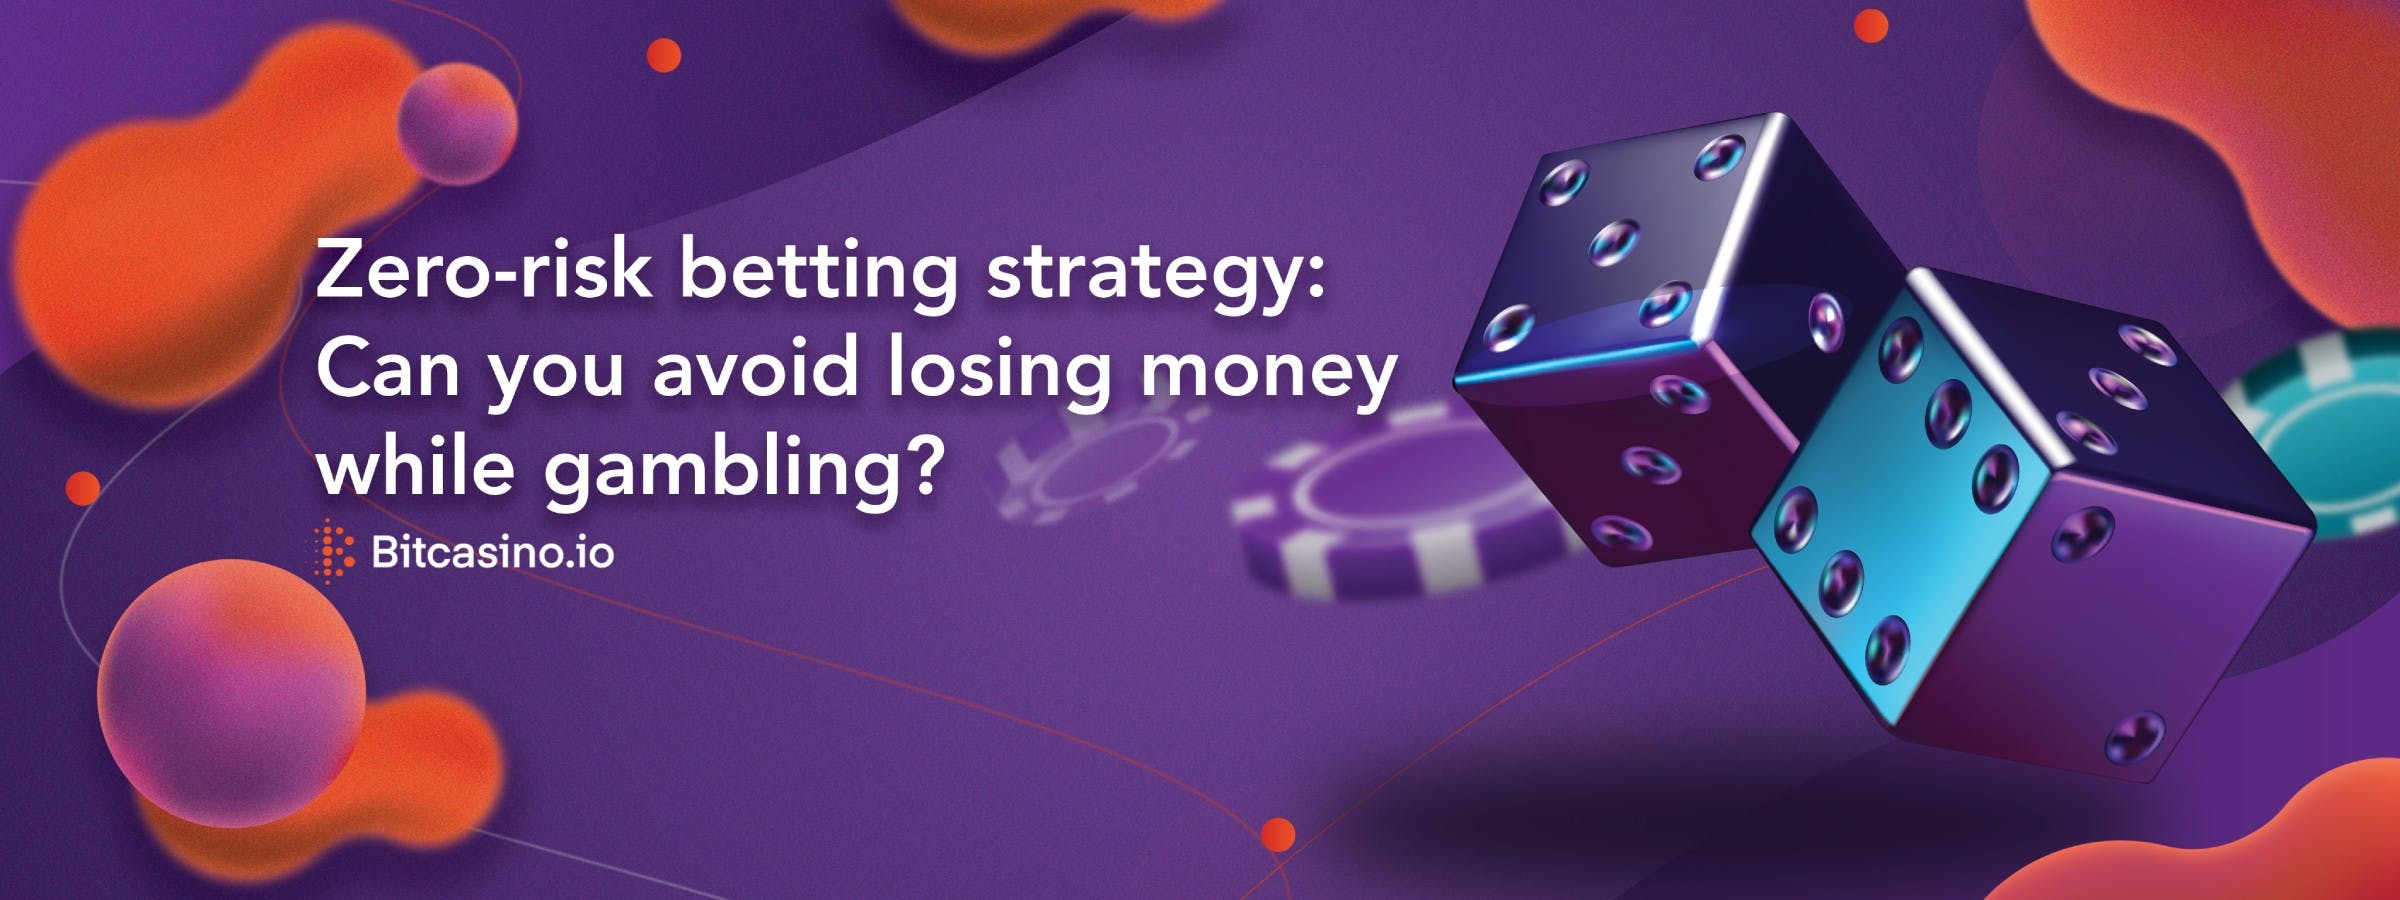 Zero betting strategy: Can you avoid losing money while gambling?